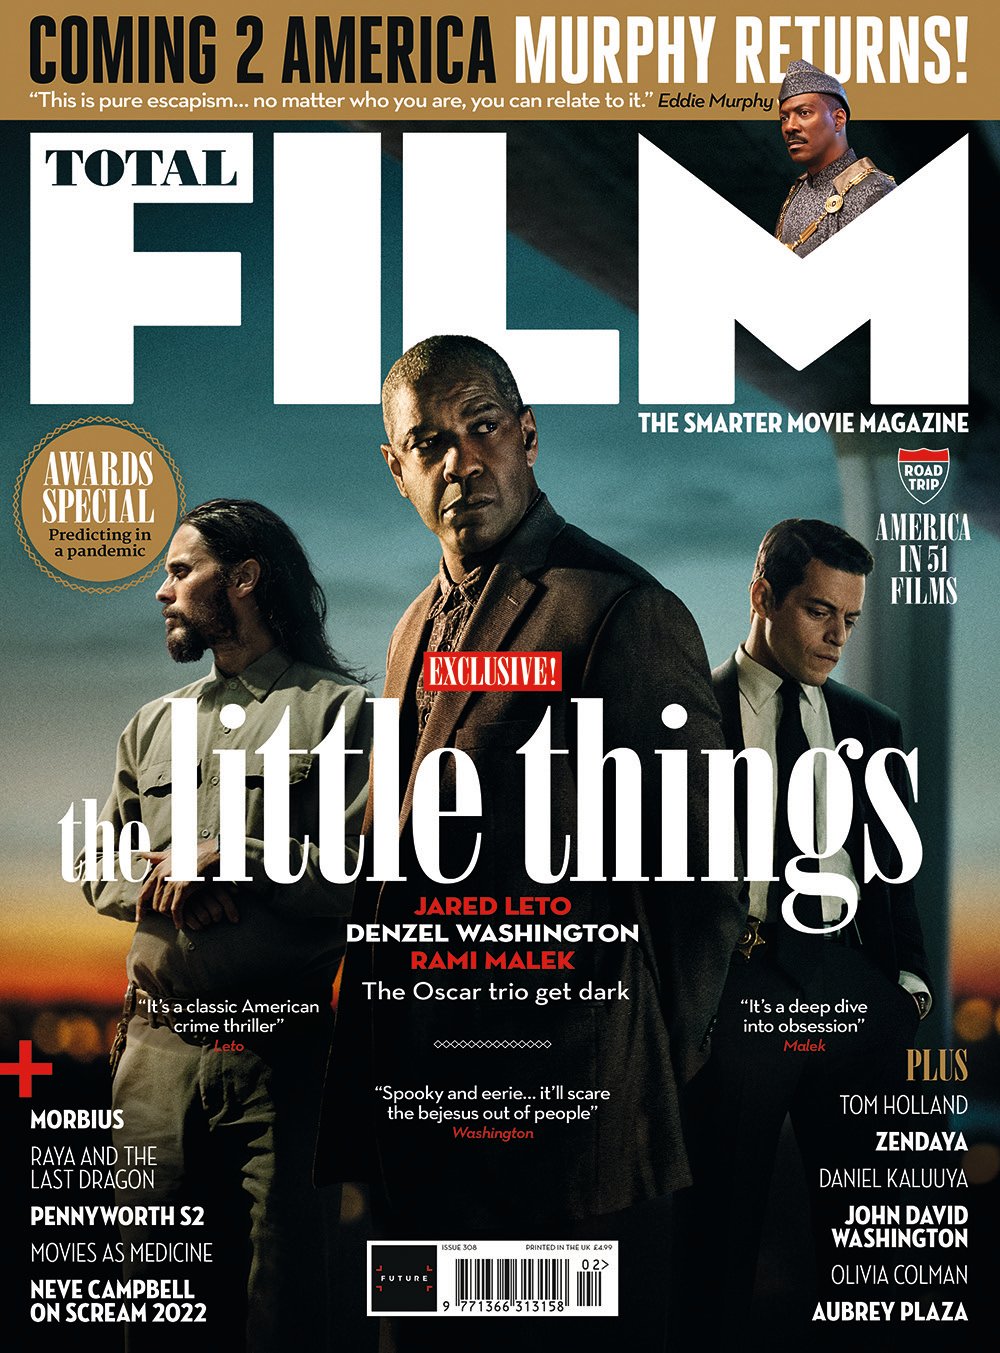 UK Total Film Magazine #308: the little things EXCLUSIVE Jared Leto Rami Malek